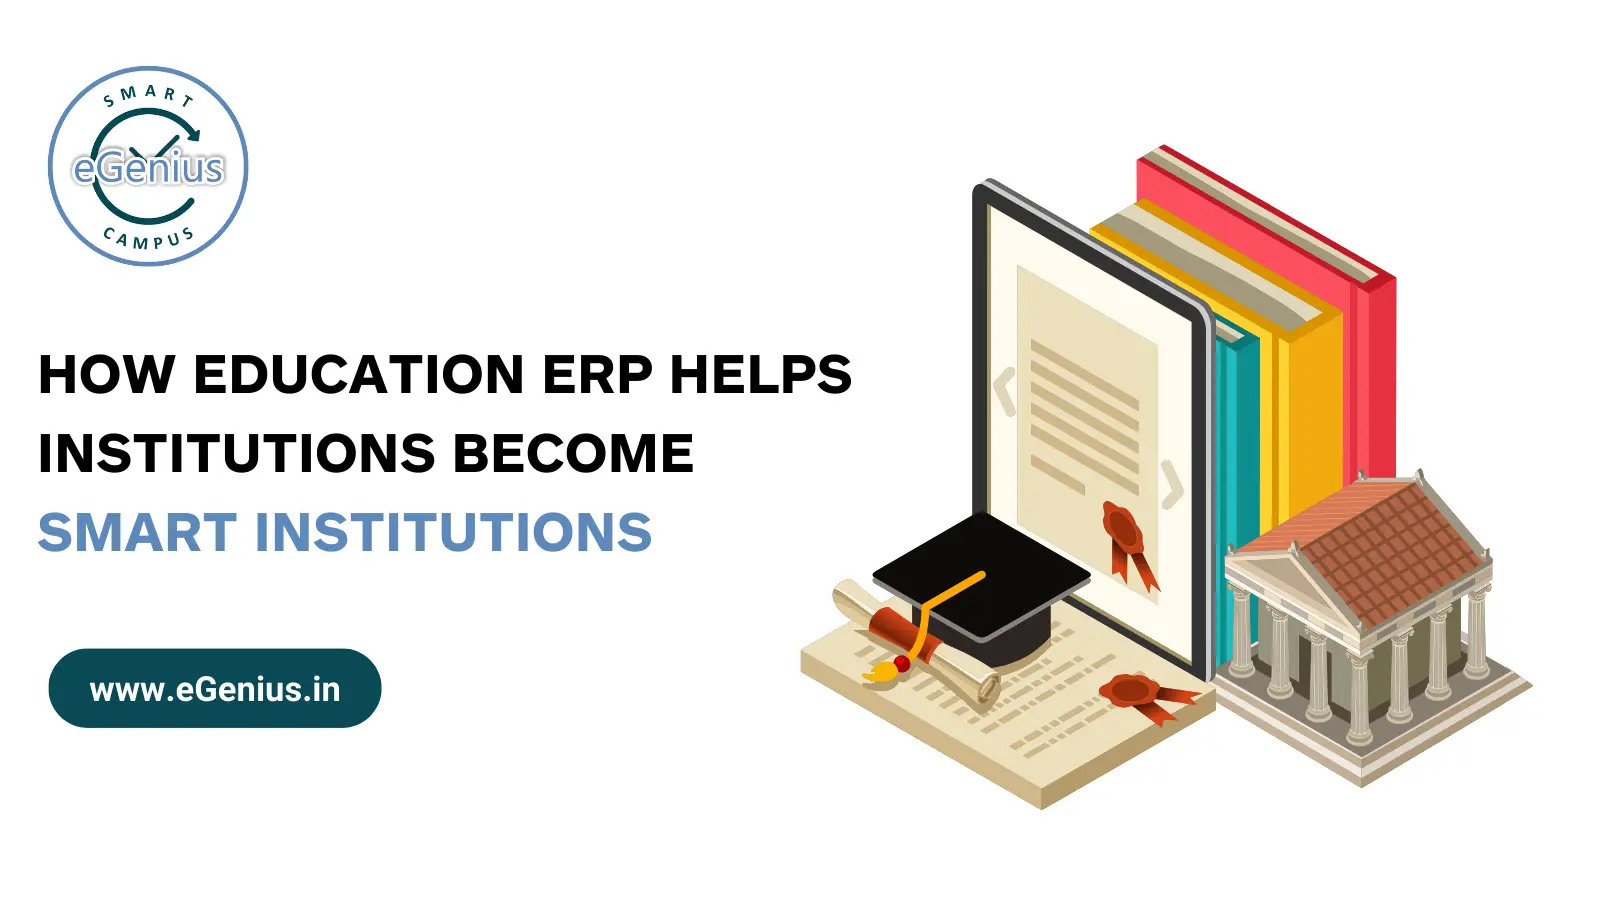 How Education ERP helps institutions become smart institutions